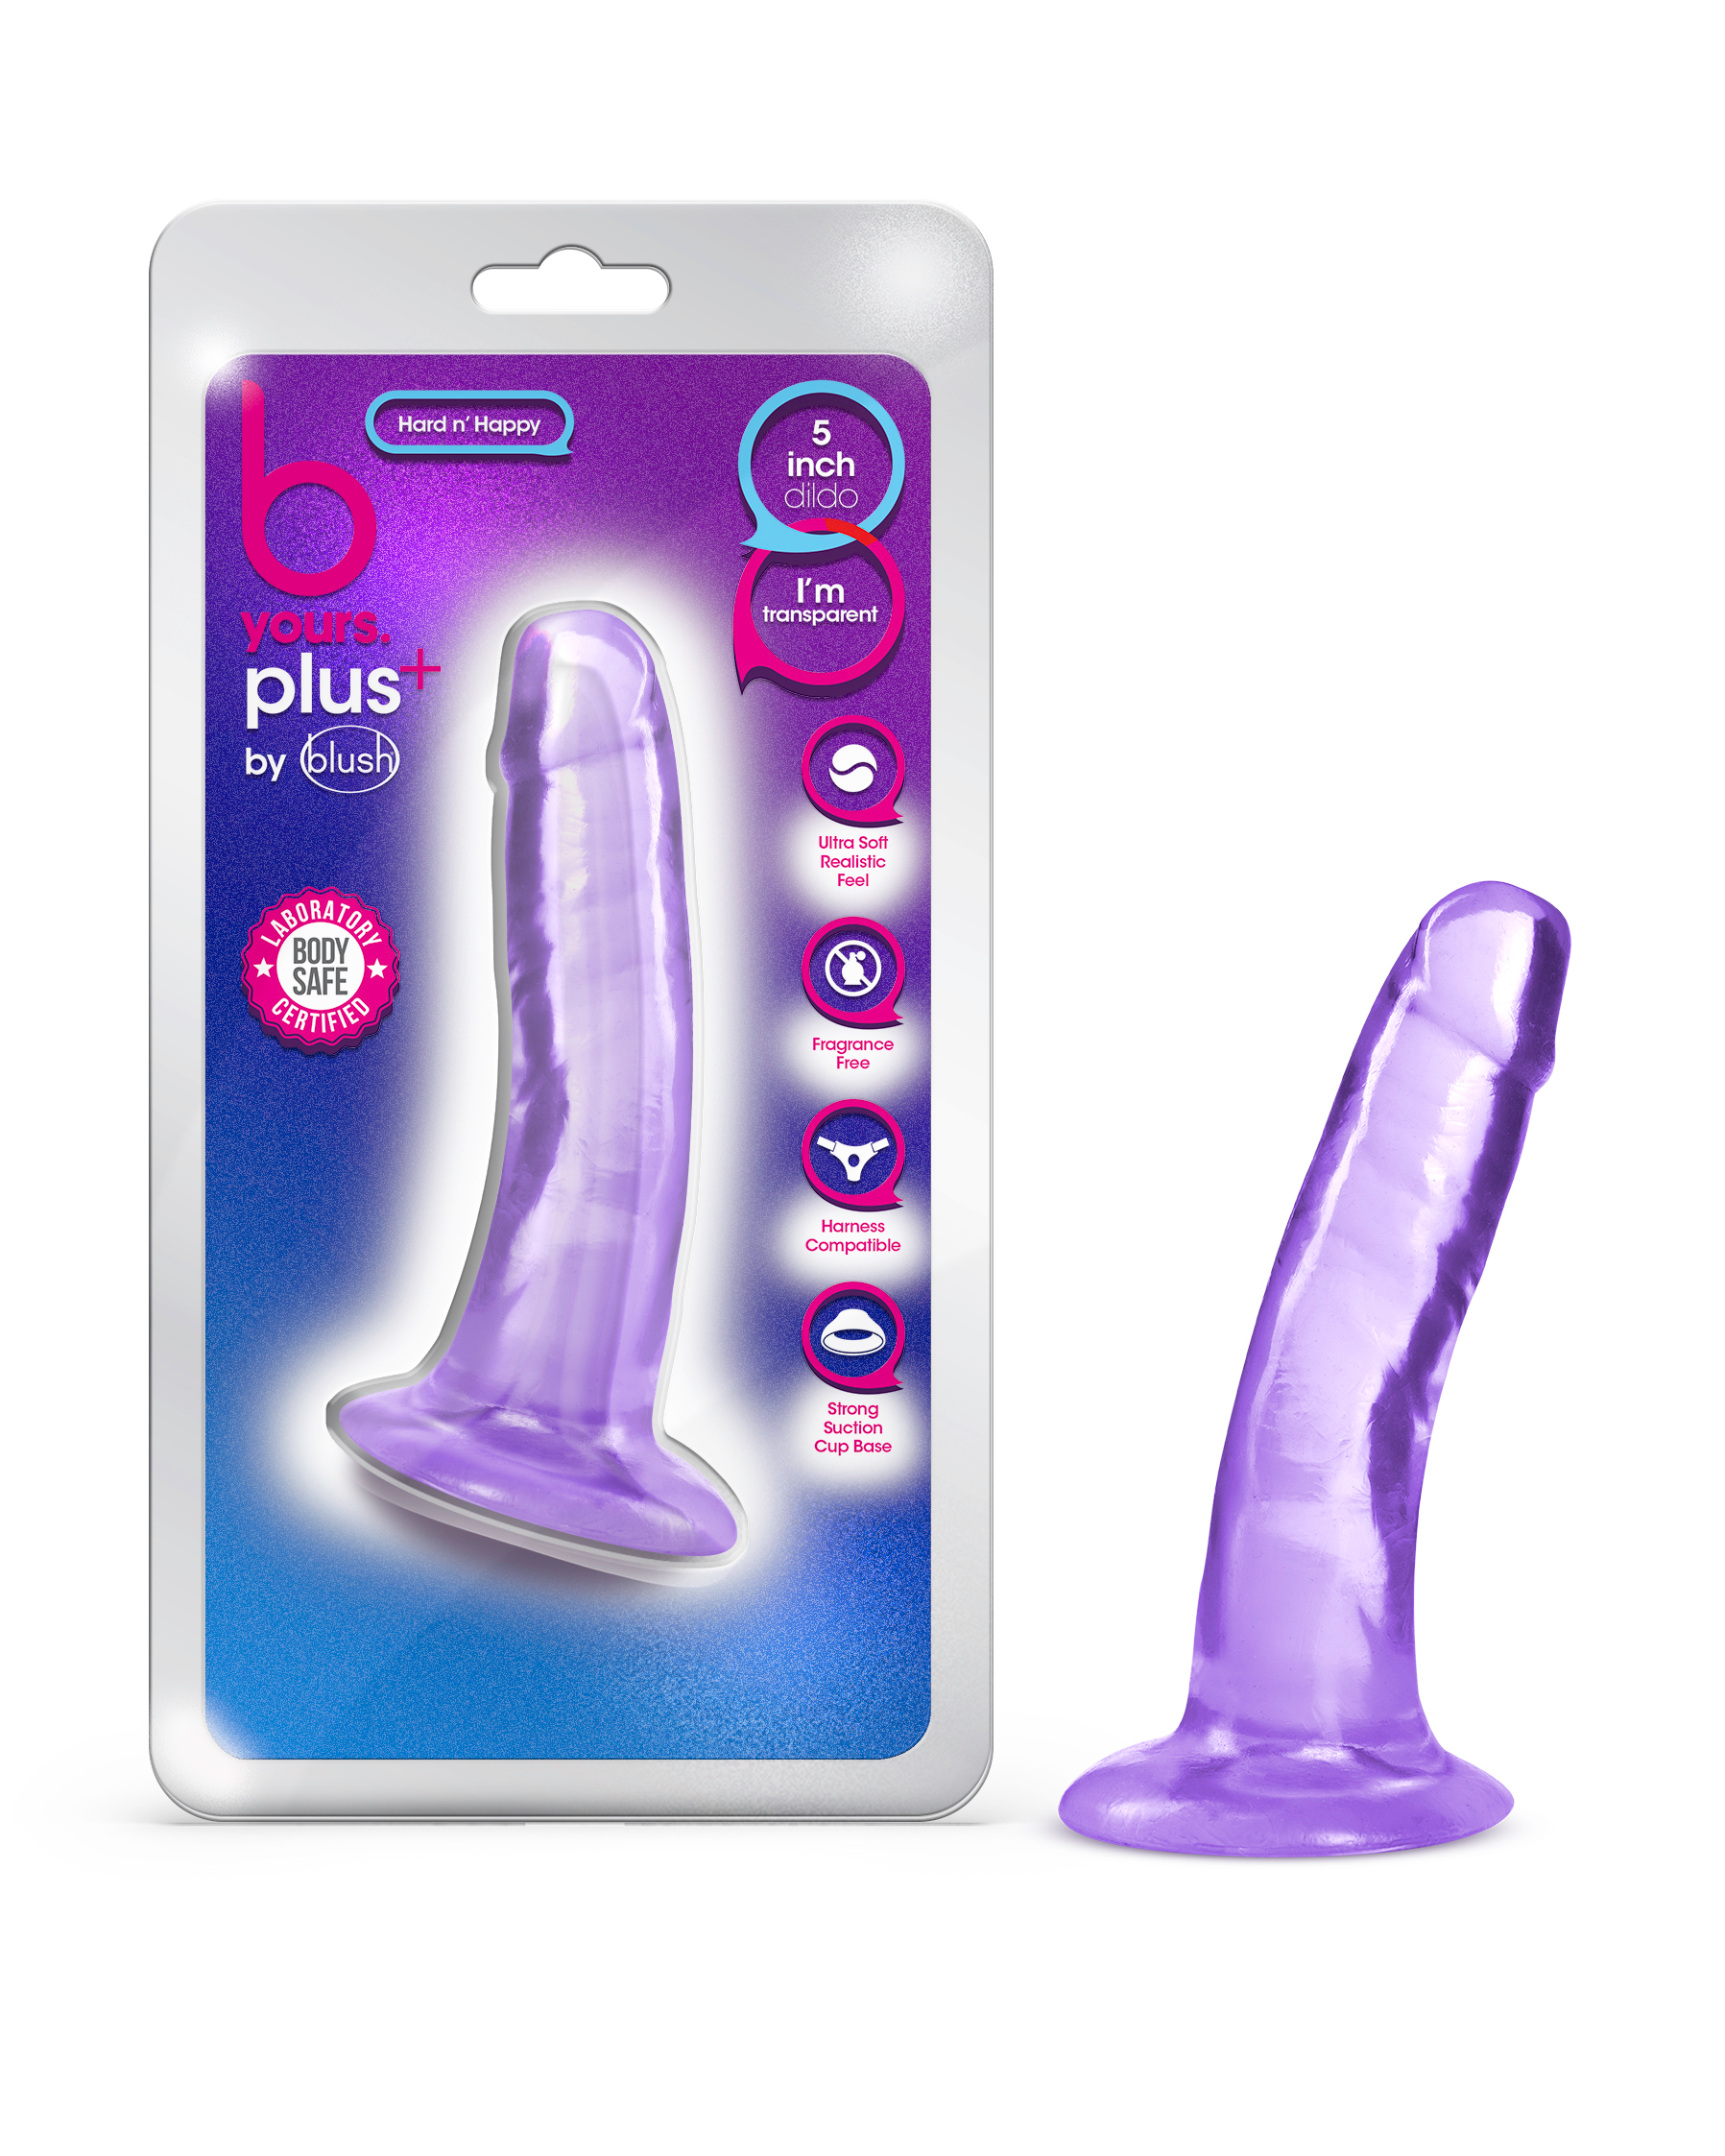 suction cup dildo, dildo with suction cup